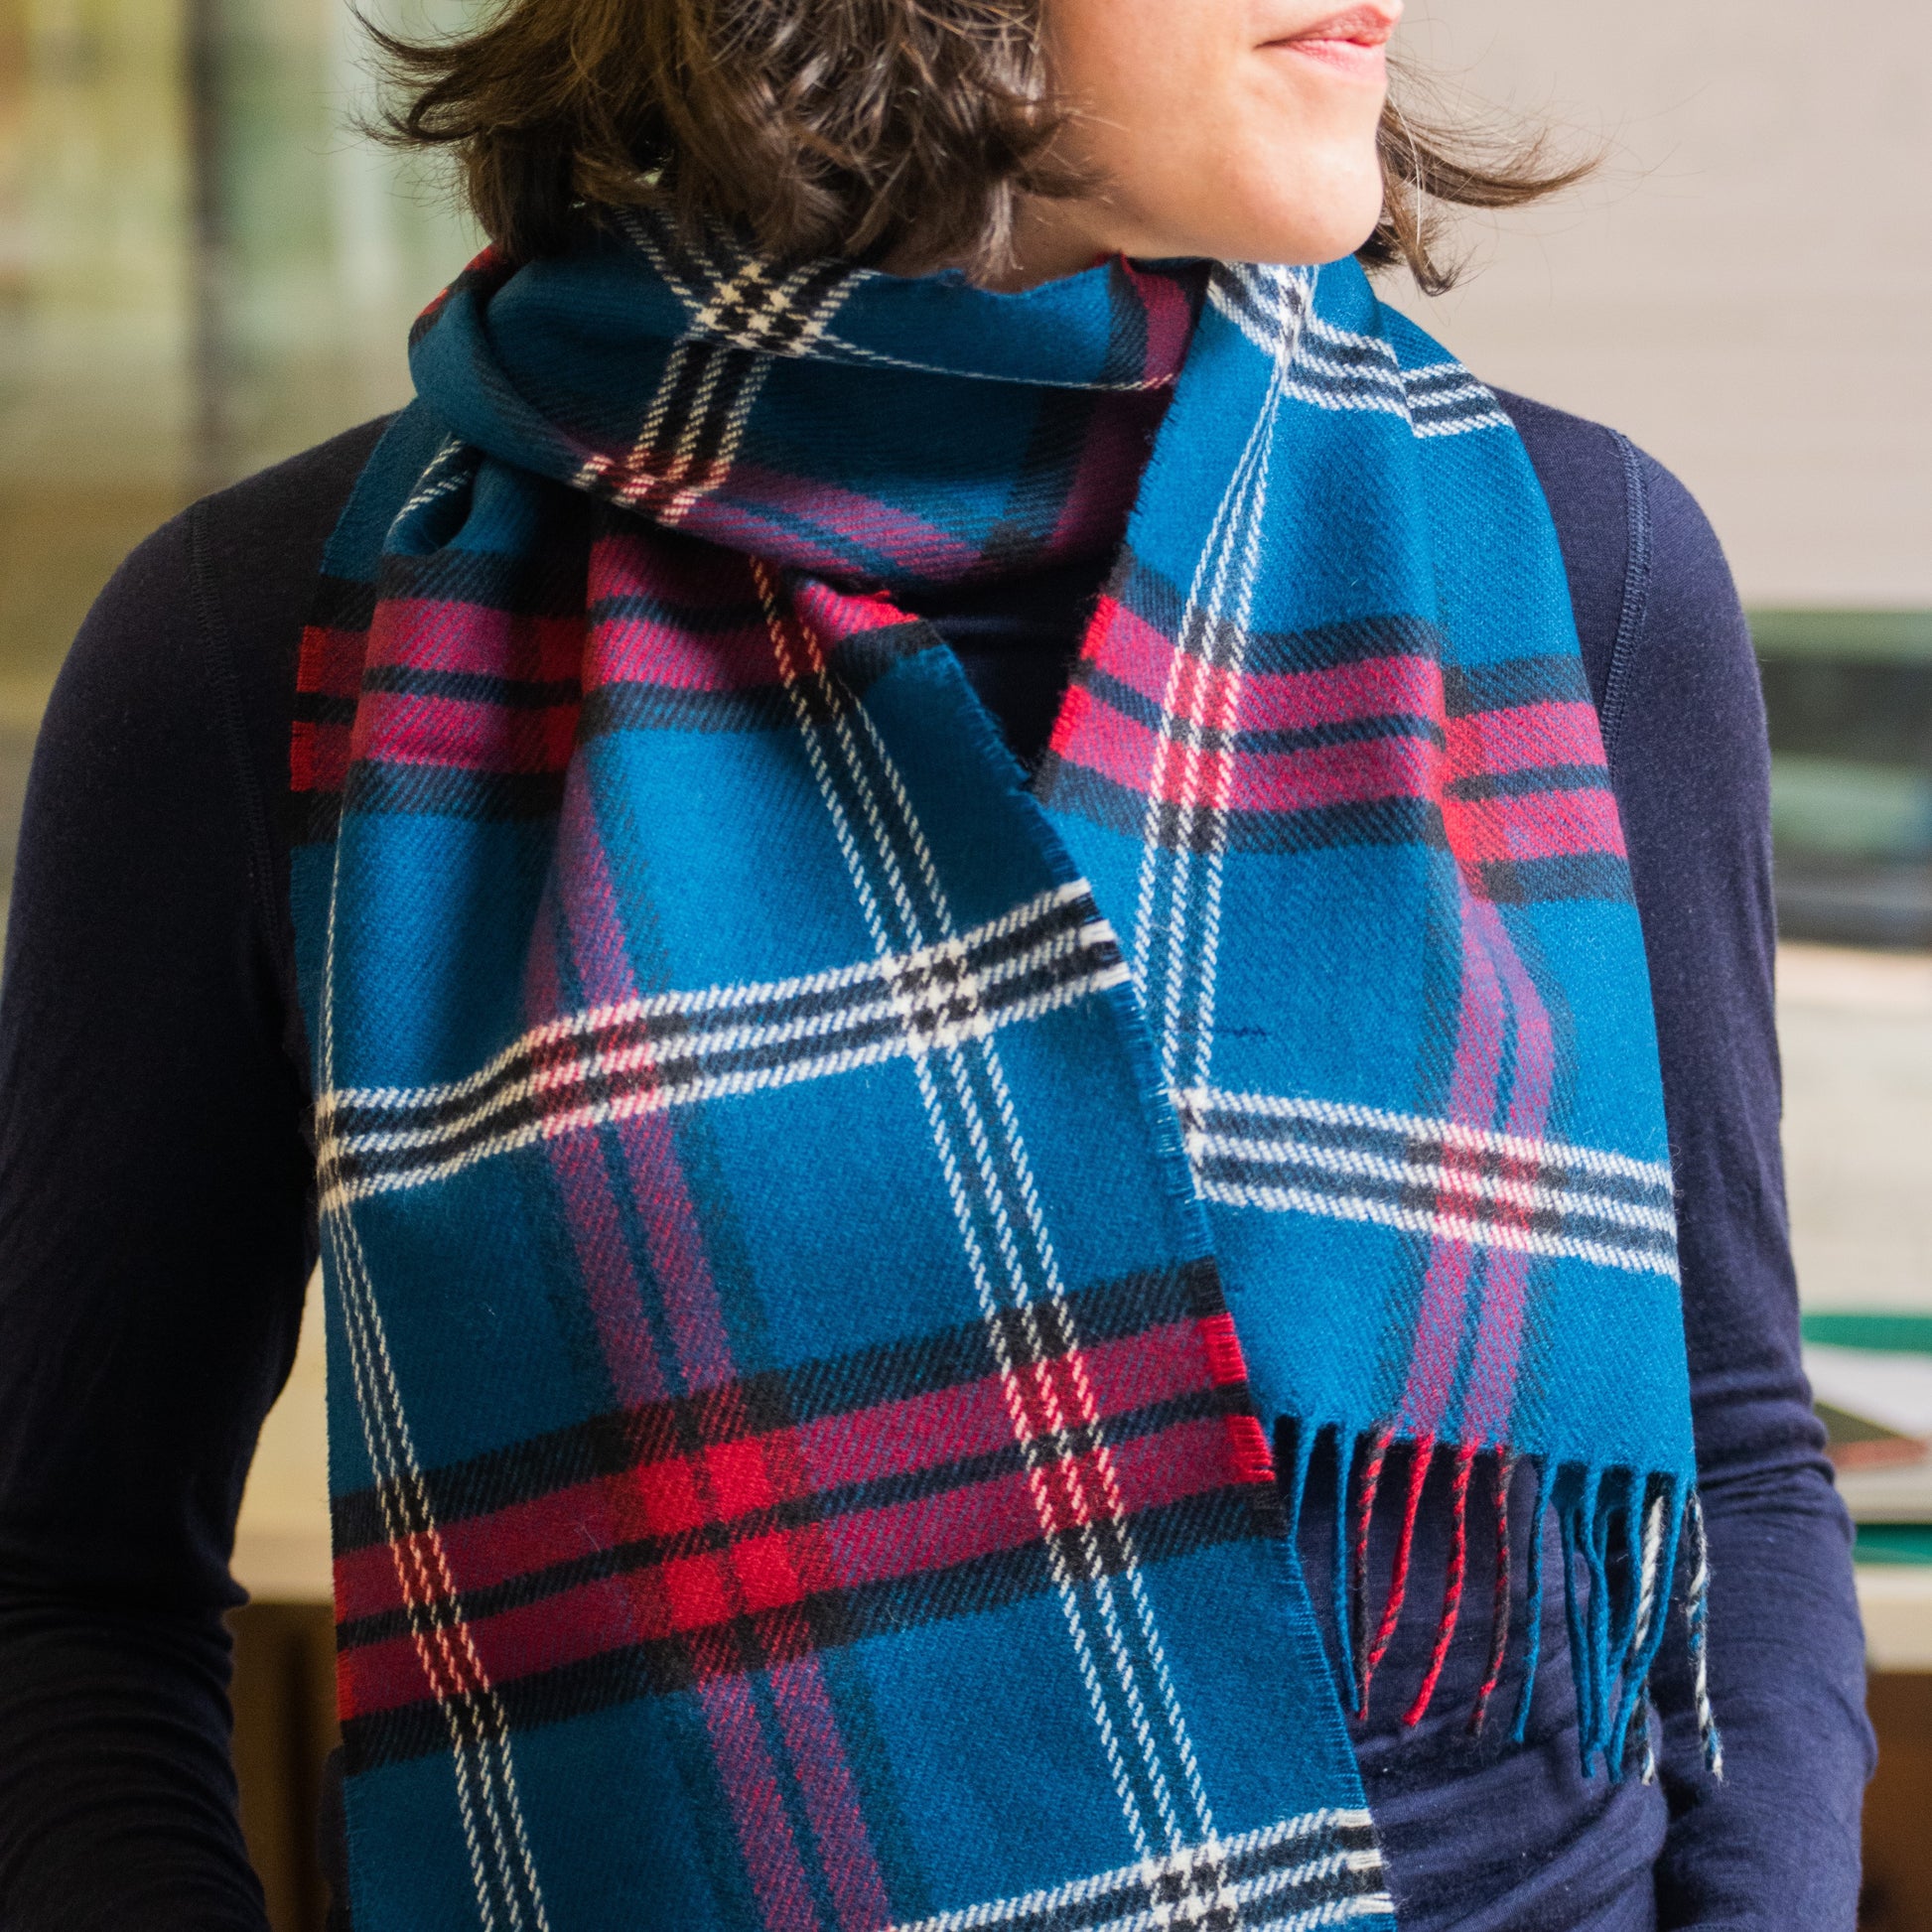 Our model wearing the tartan lambswool scarf around her neck.